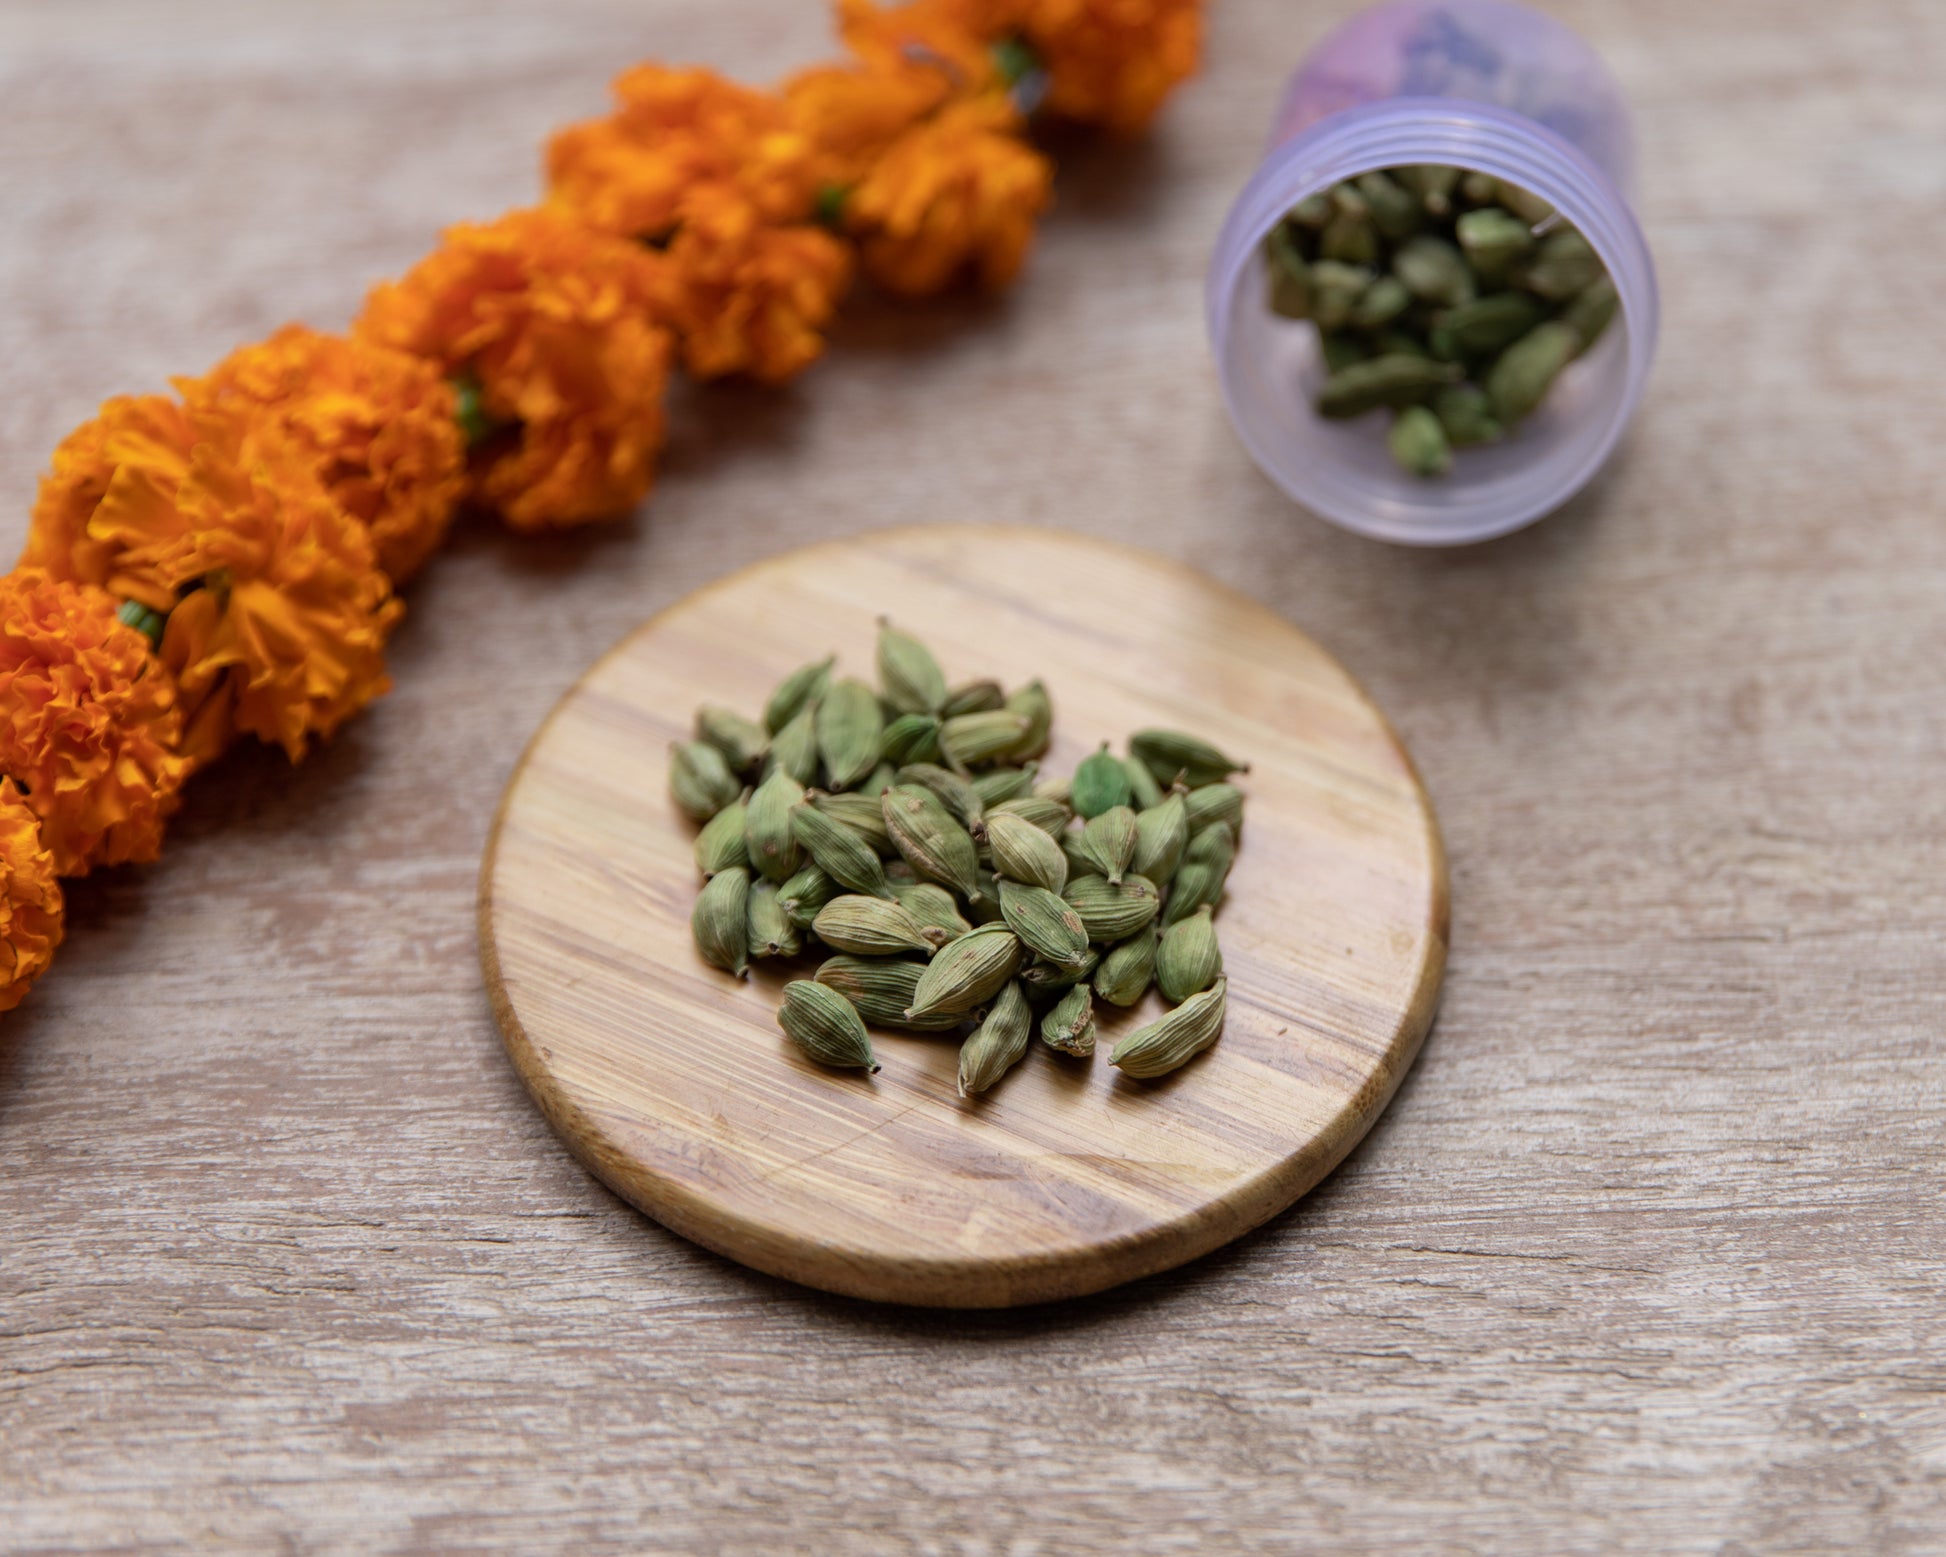 Elaichi, or cardamom, stands as a symbol of purity, fragrance, and spiritual awakening.